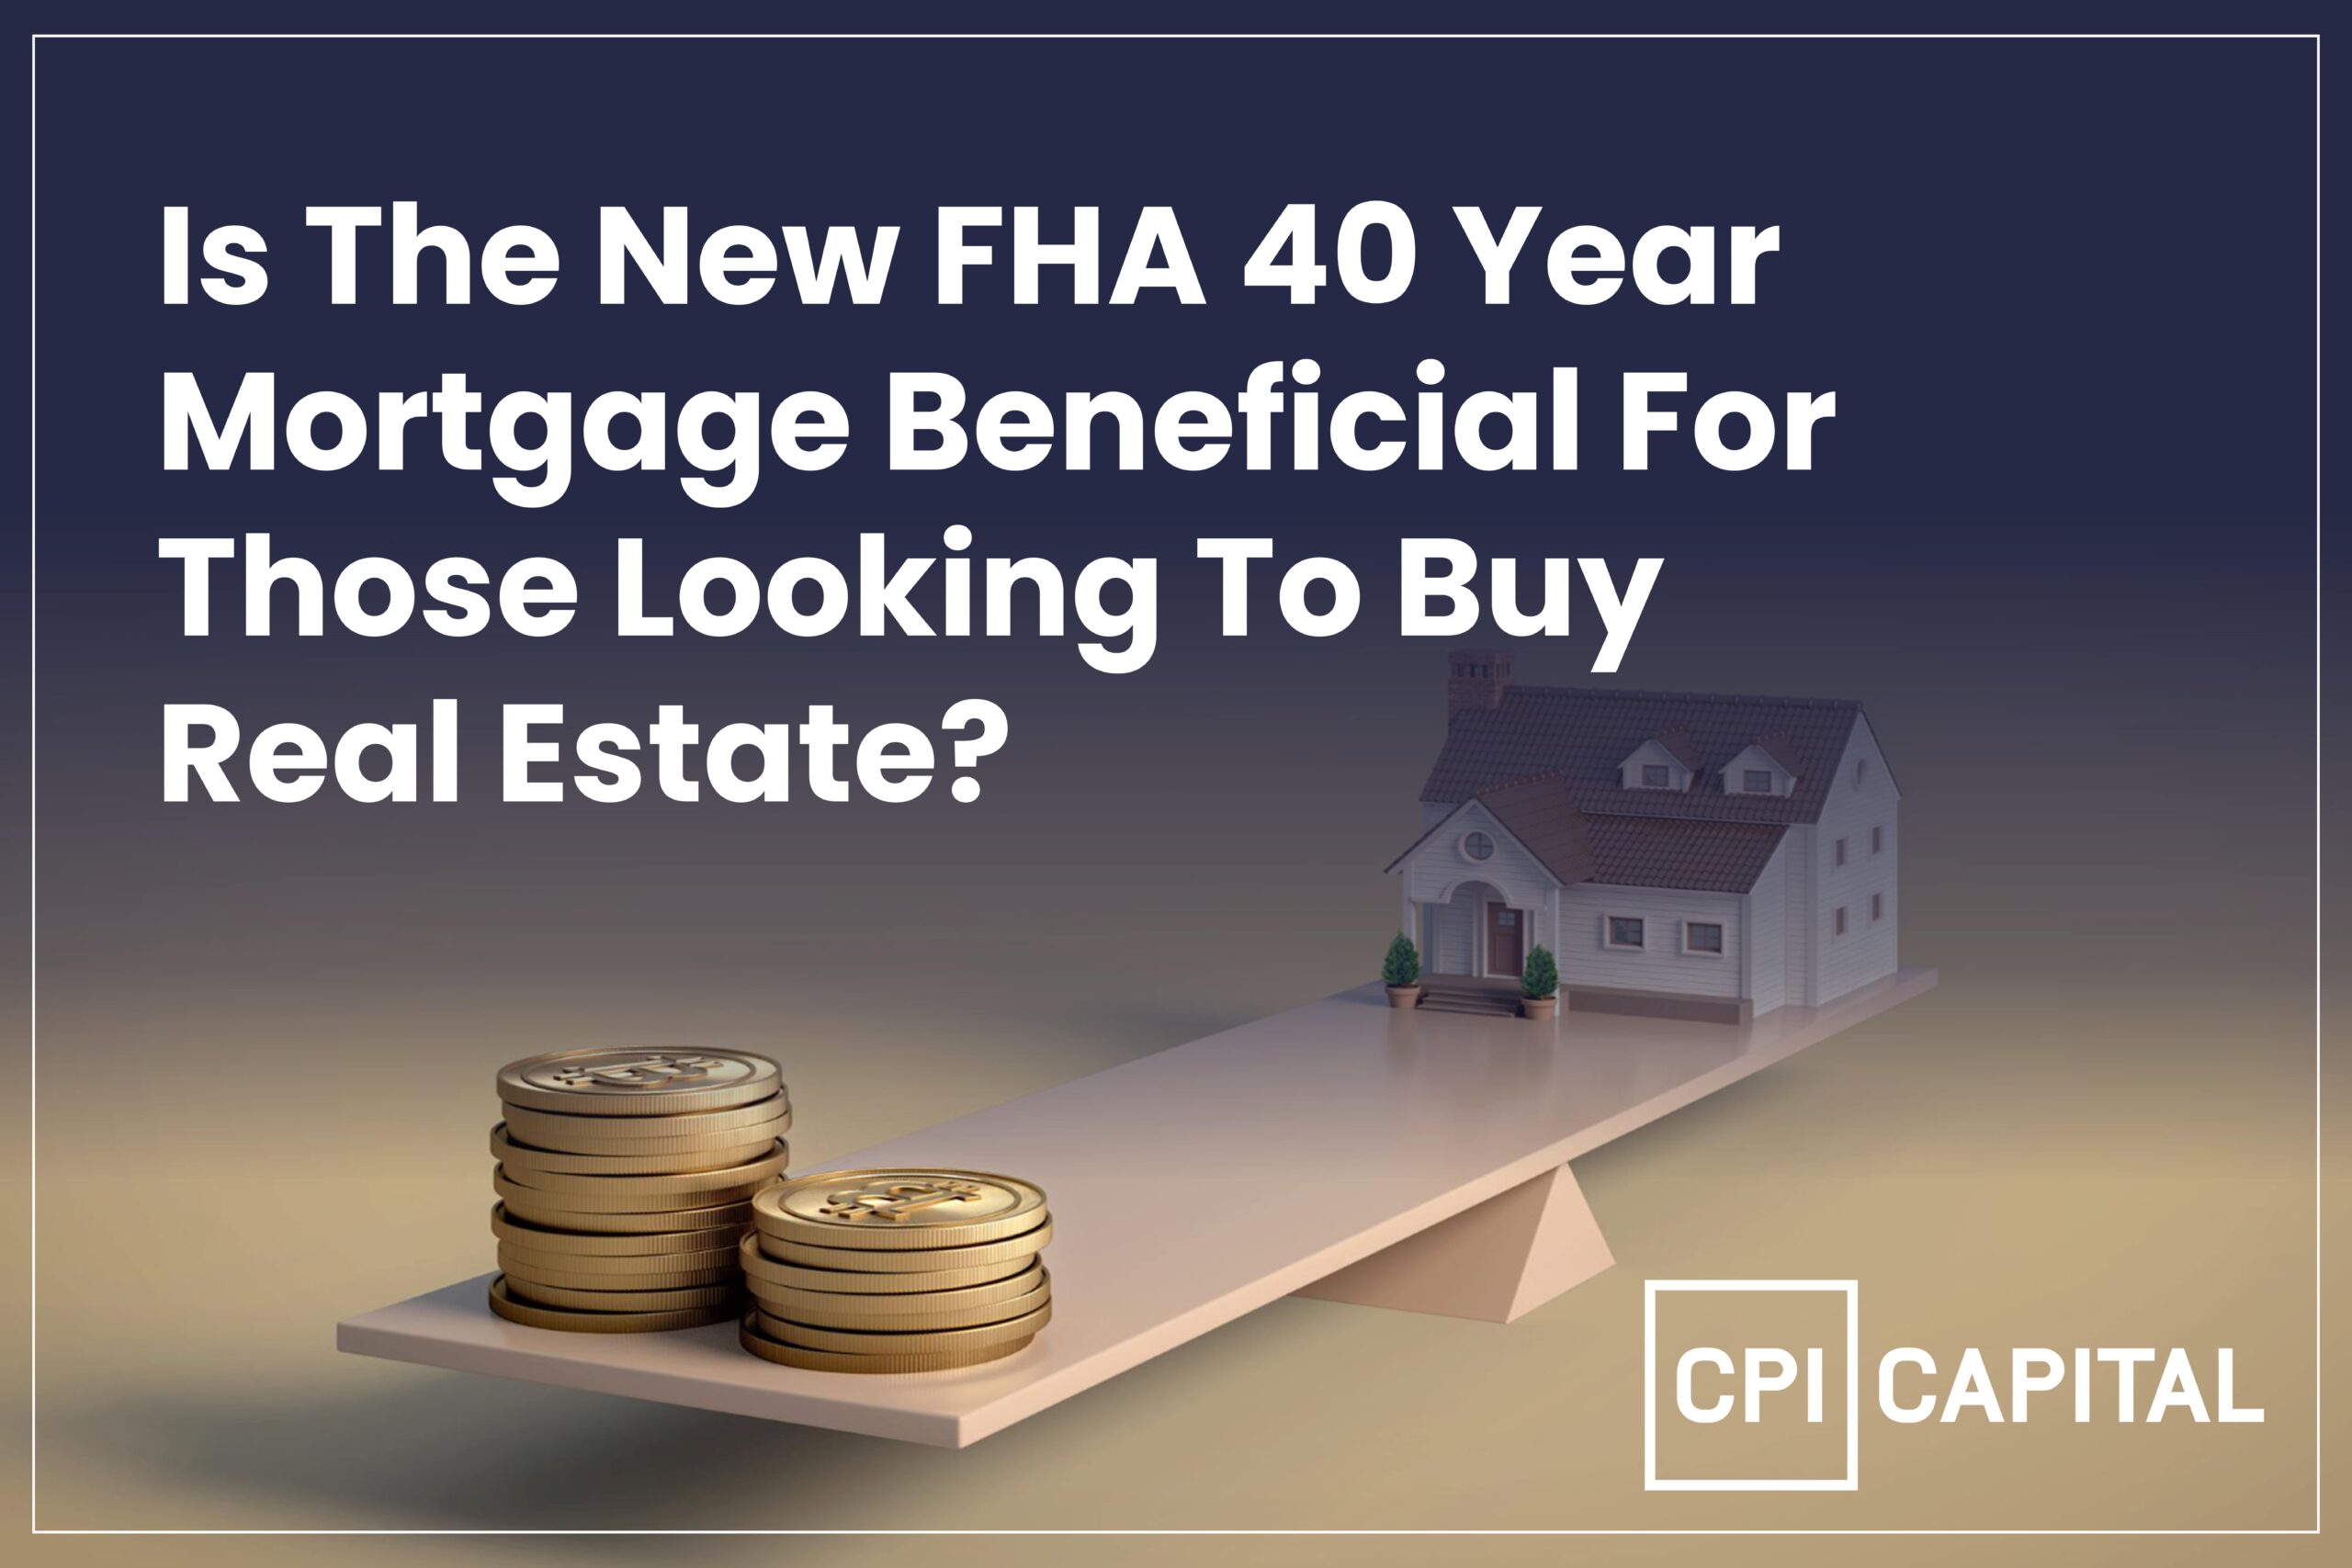 Is The New FHA 40 Year Mortgage Beneficial For Those Looking To Buy Real Estate?